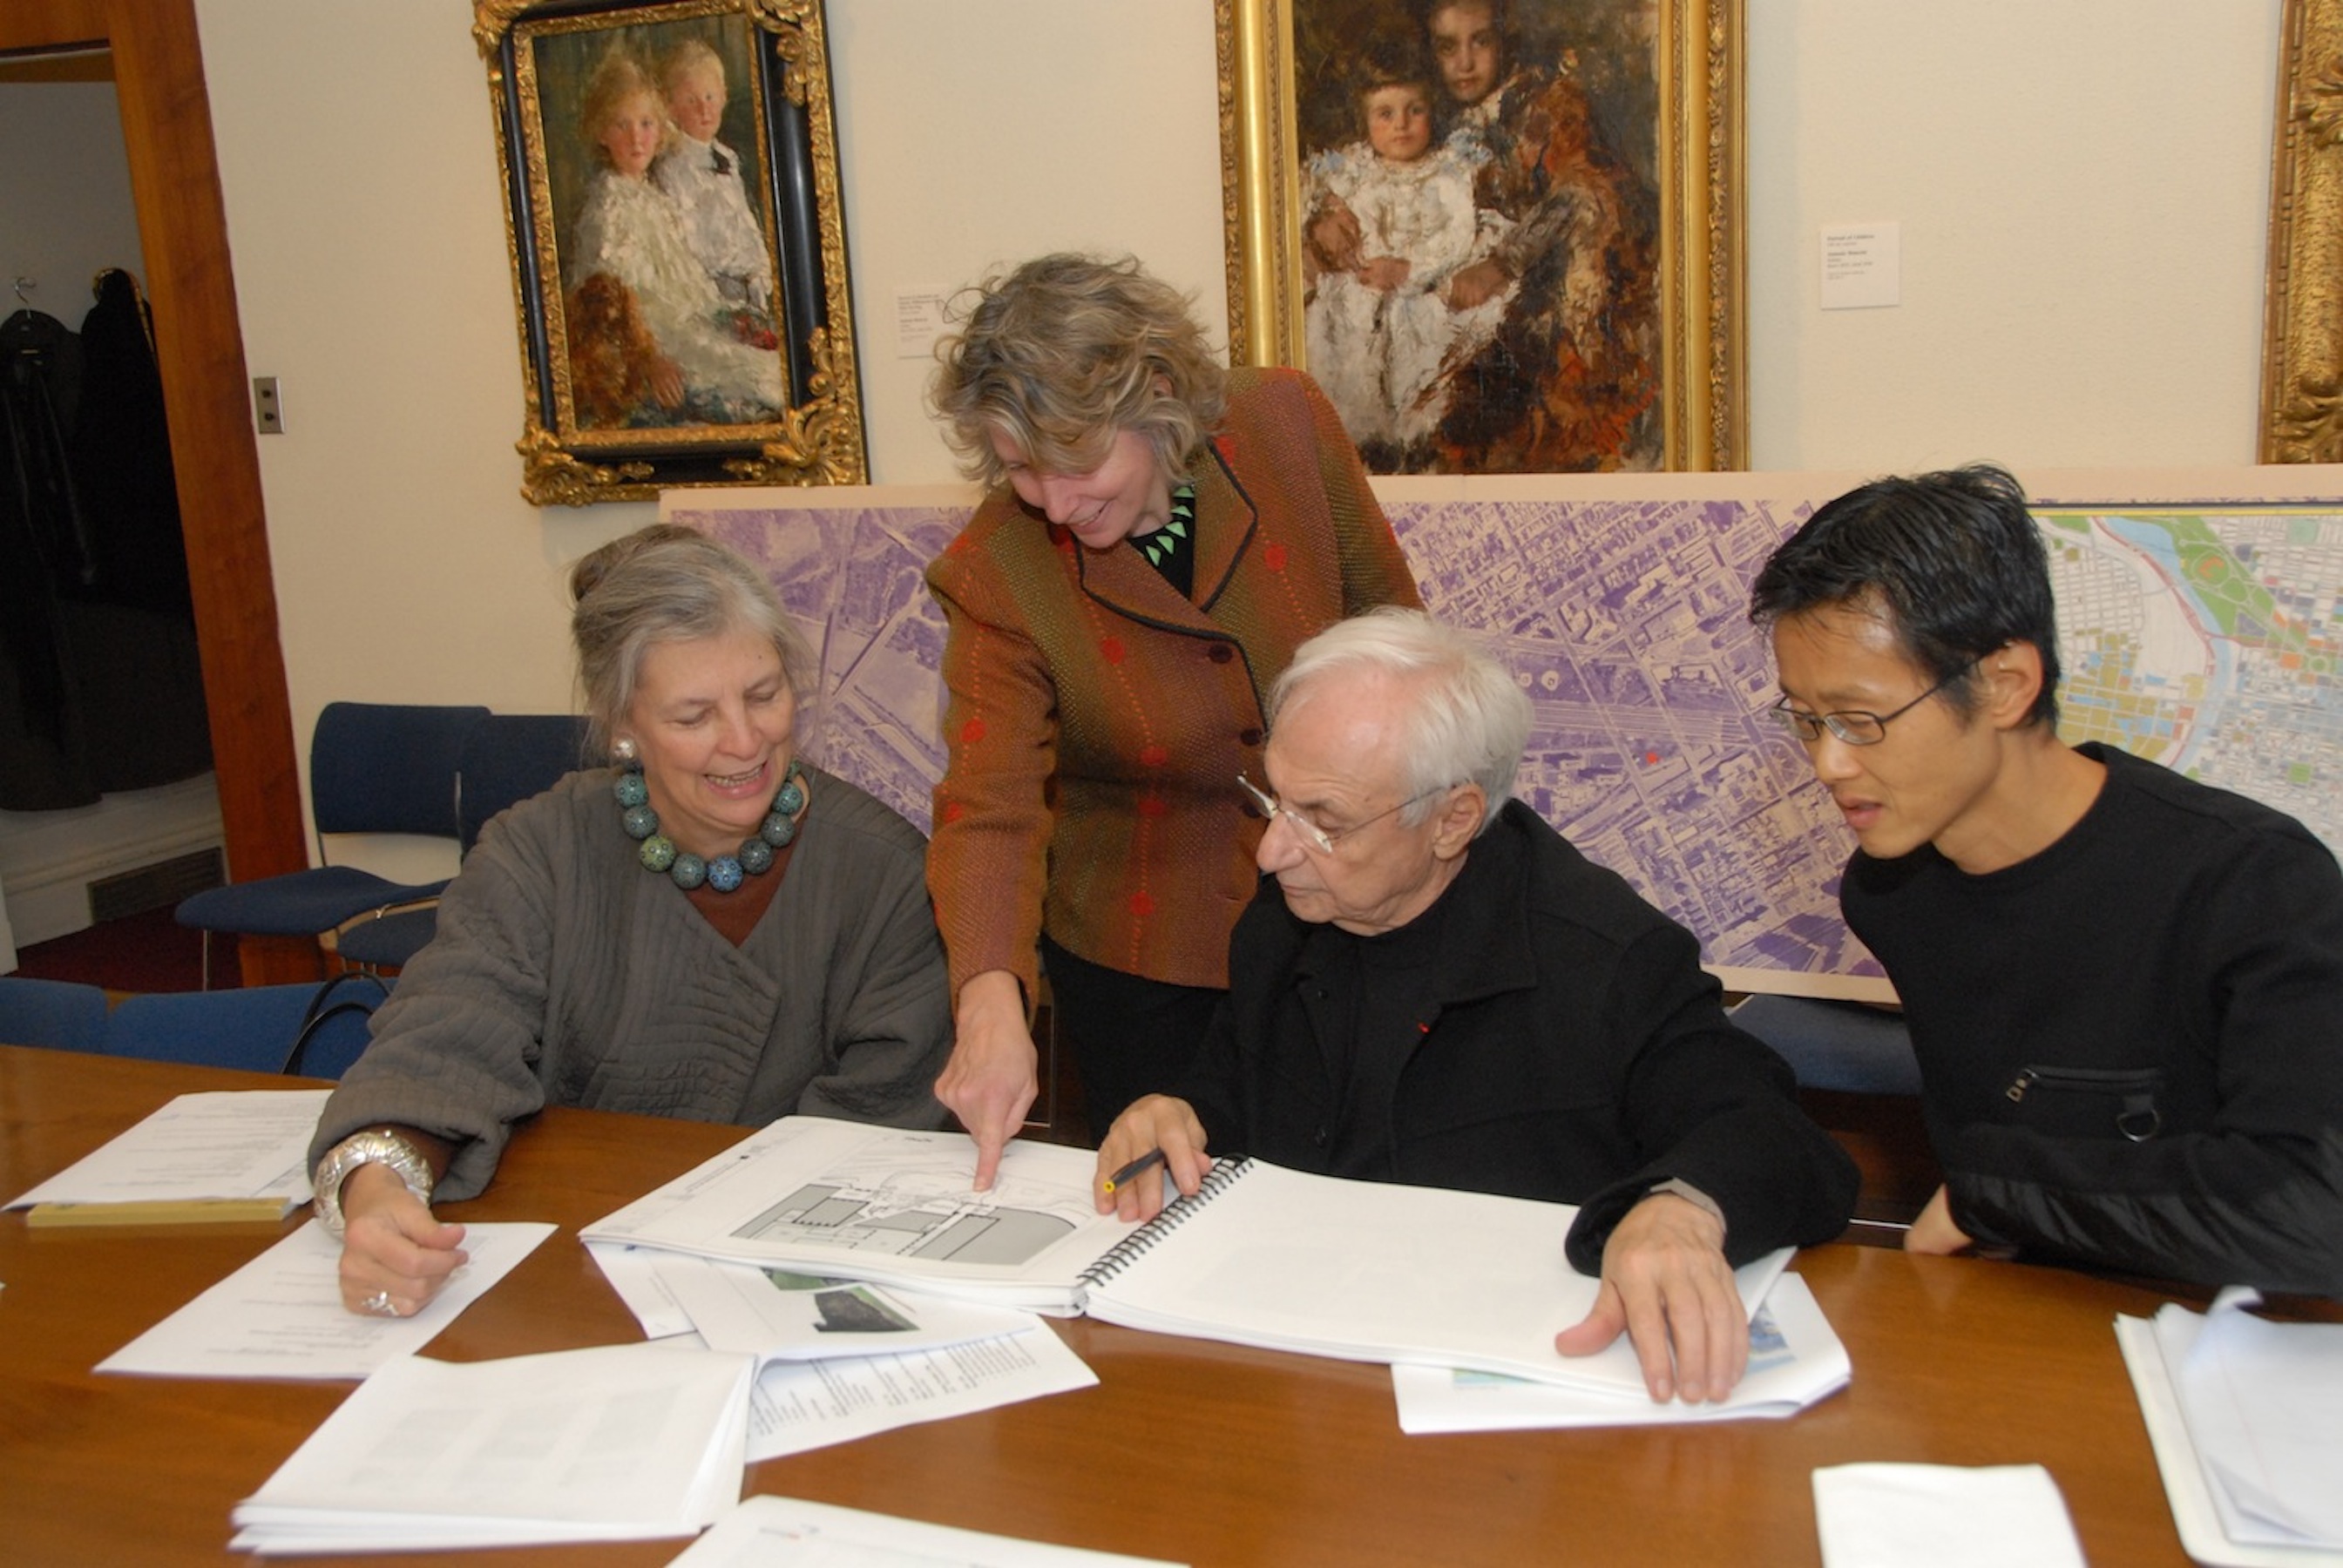 Anne d’Harnoncourt (wearing a Ford/Forlano necklace),Gail Harrity,Frank Gehry and assistant